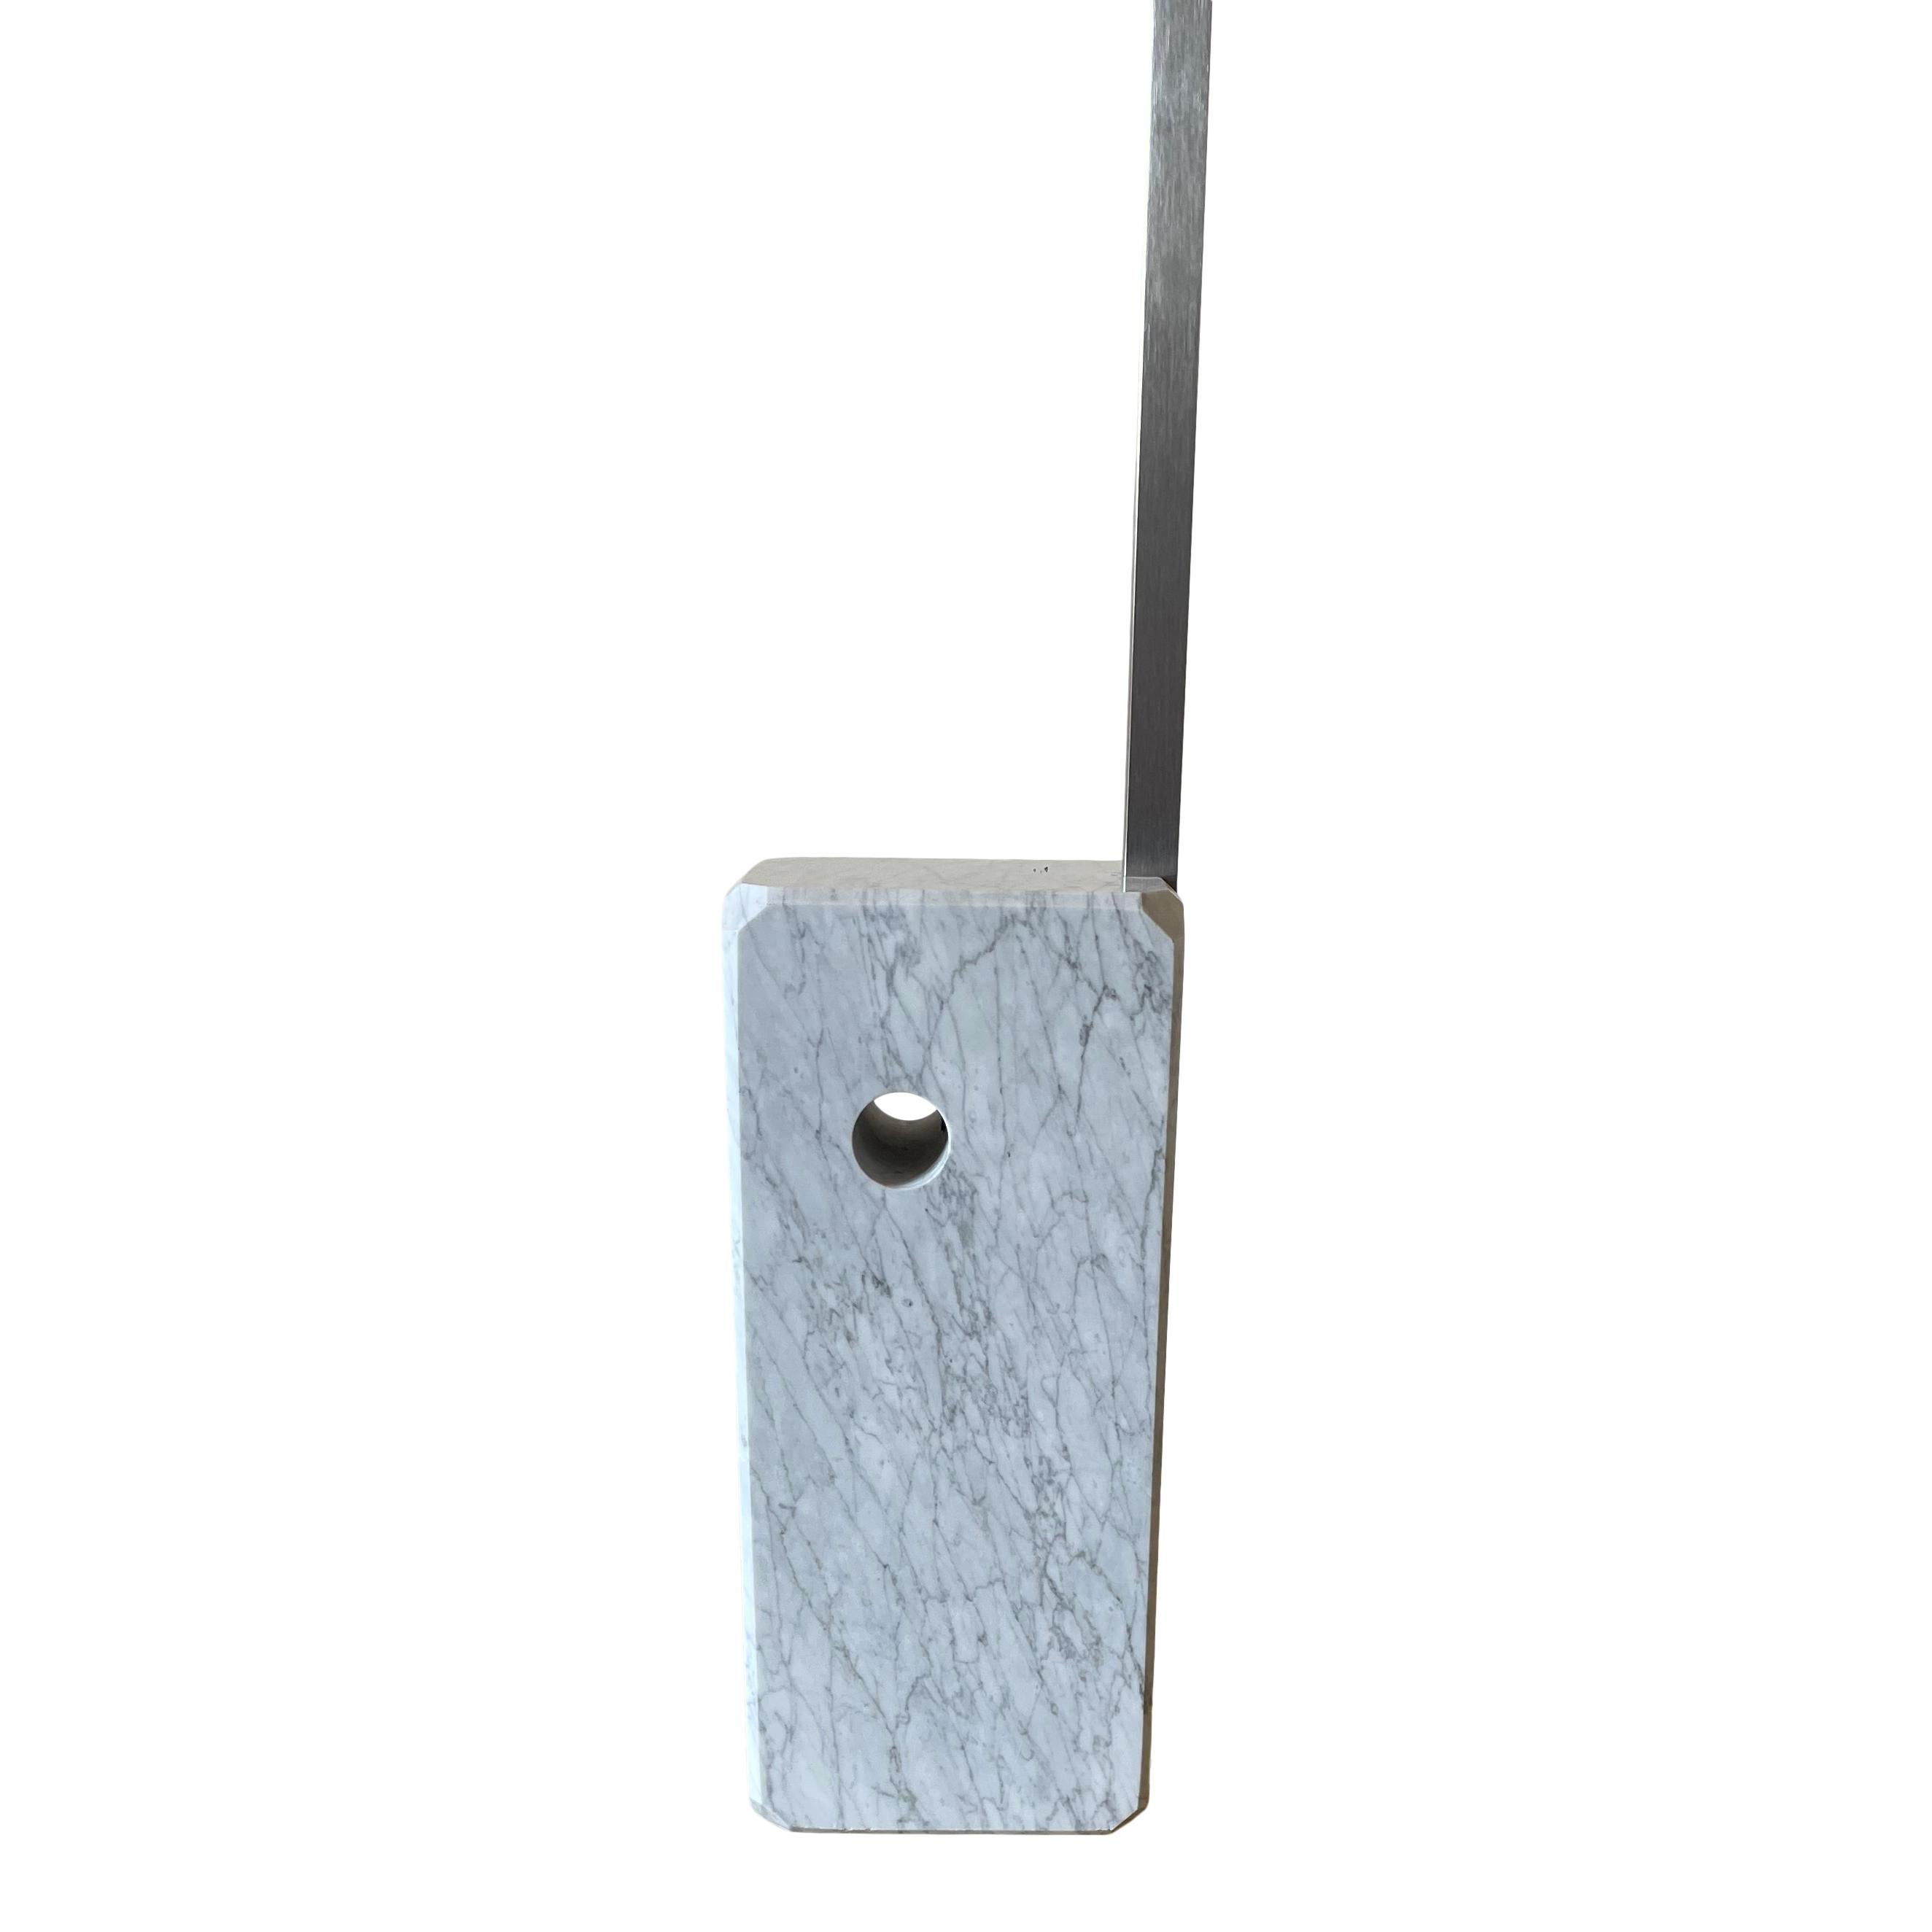 Achille & Pier Giacomo Castiglioni Marble and Steel Arco Lamp for FLOS, 1967 In Good Condition For Sale In Vicenza, IT